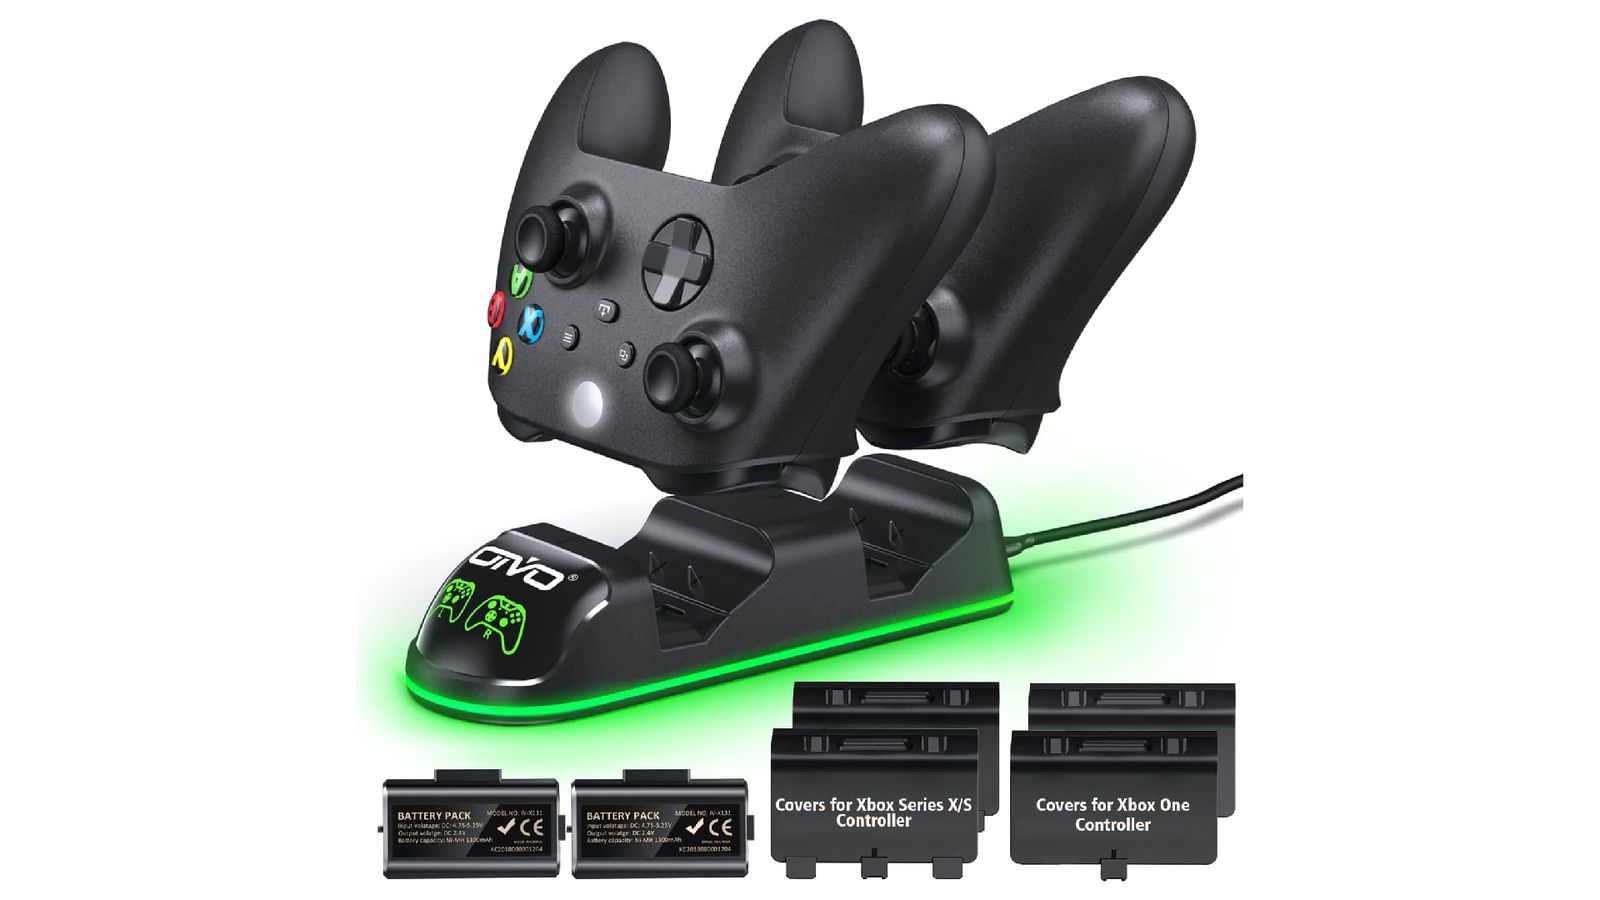 OIVO XSX product image of two Xbox controllers being placed into a black, wired charging stand featuring green lighting.